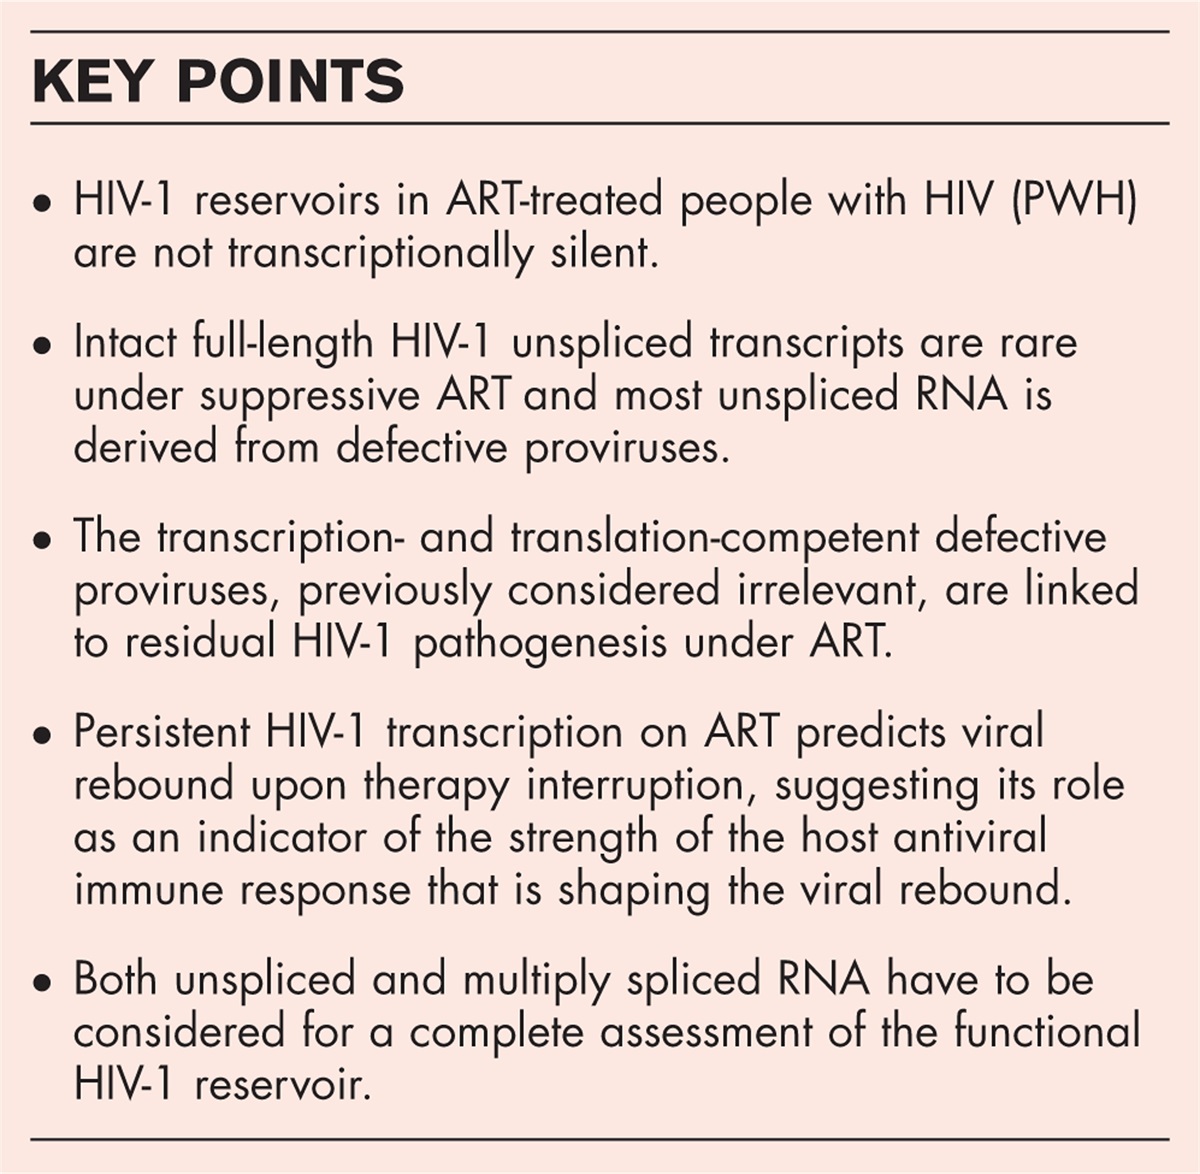 Persistent HIV-1 transcription during ART: time to reassess its significance?